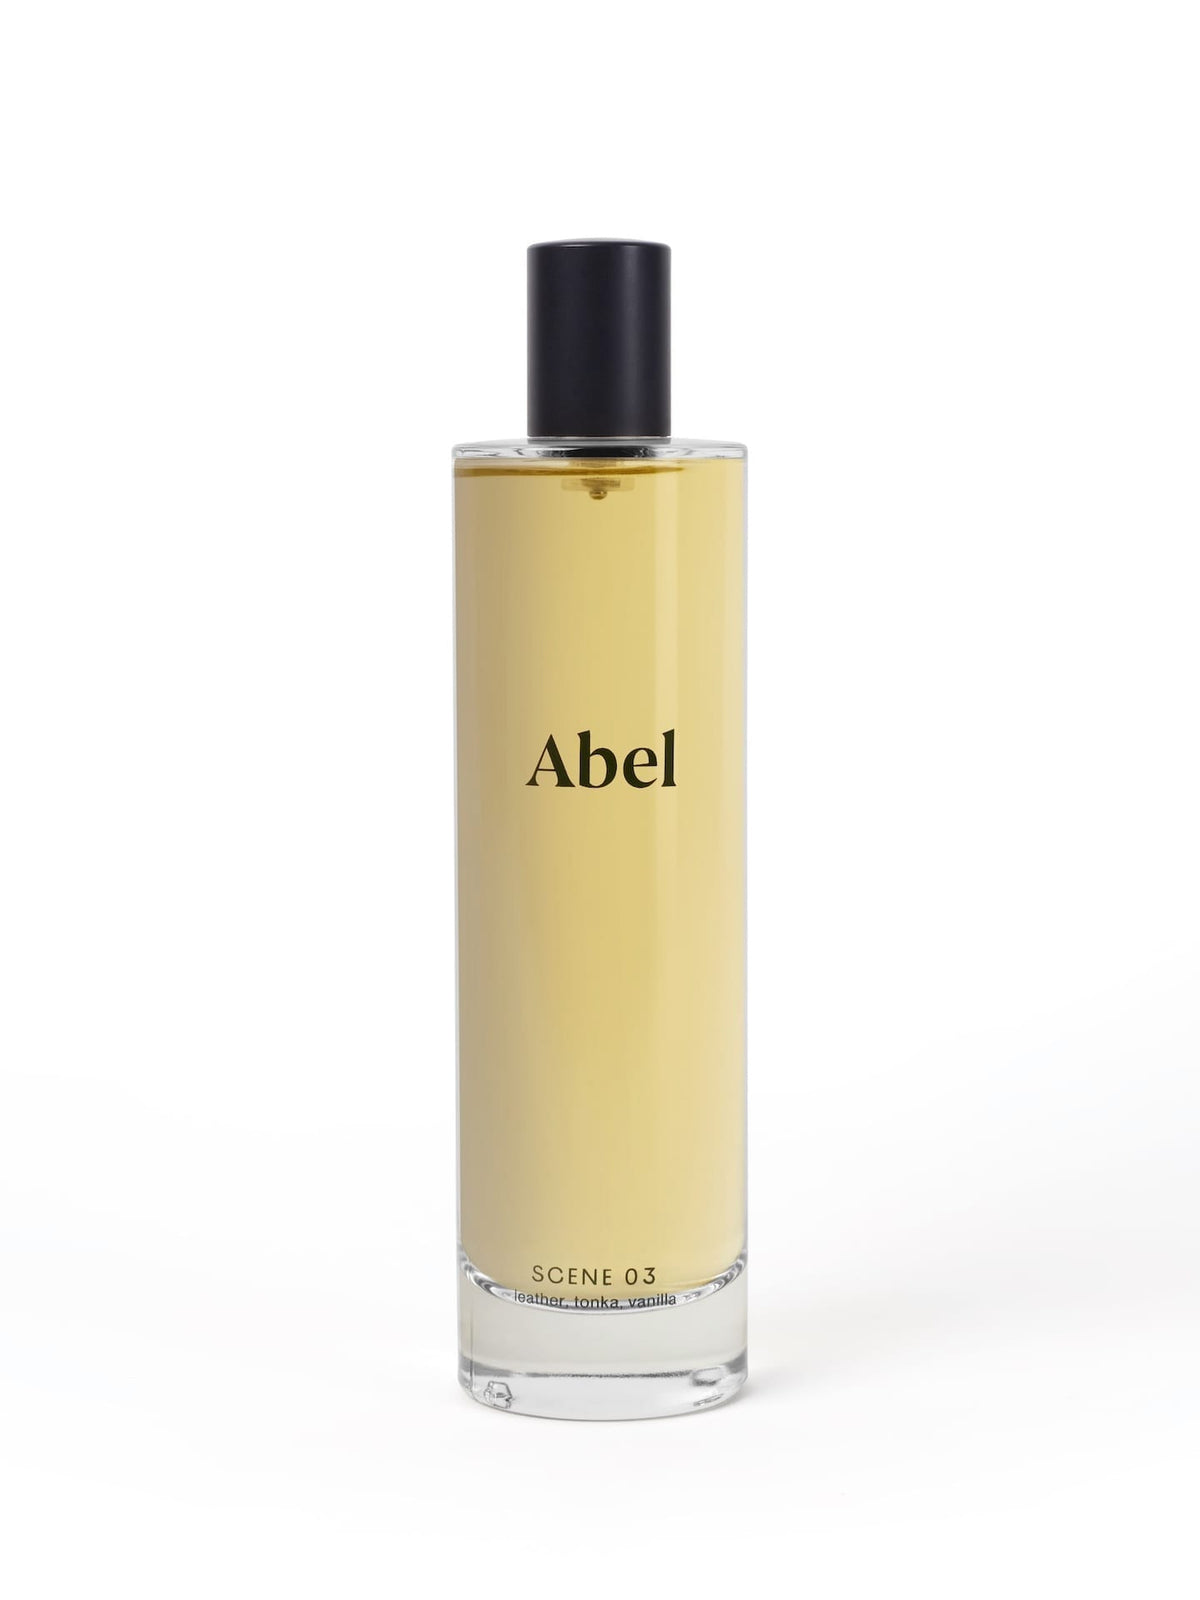 A bottle of Abel Room Spray – Scene 03 ⋅ leather, tonka, vanilla, crafted with natural ingredients, against a white background.